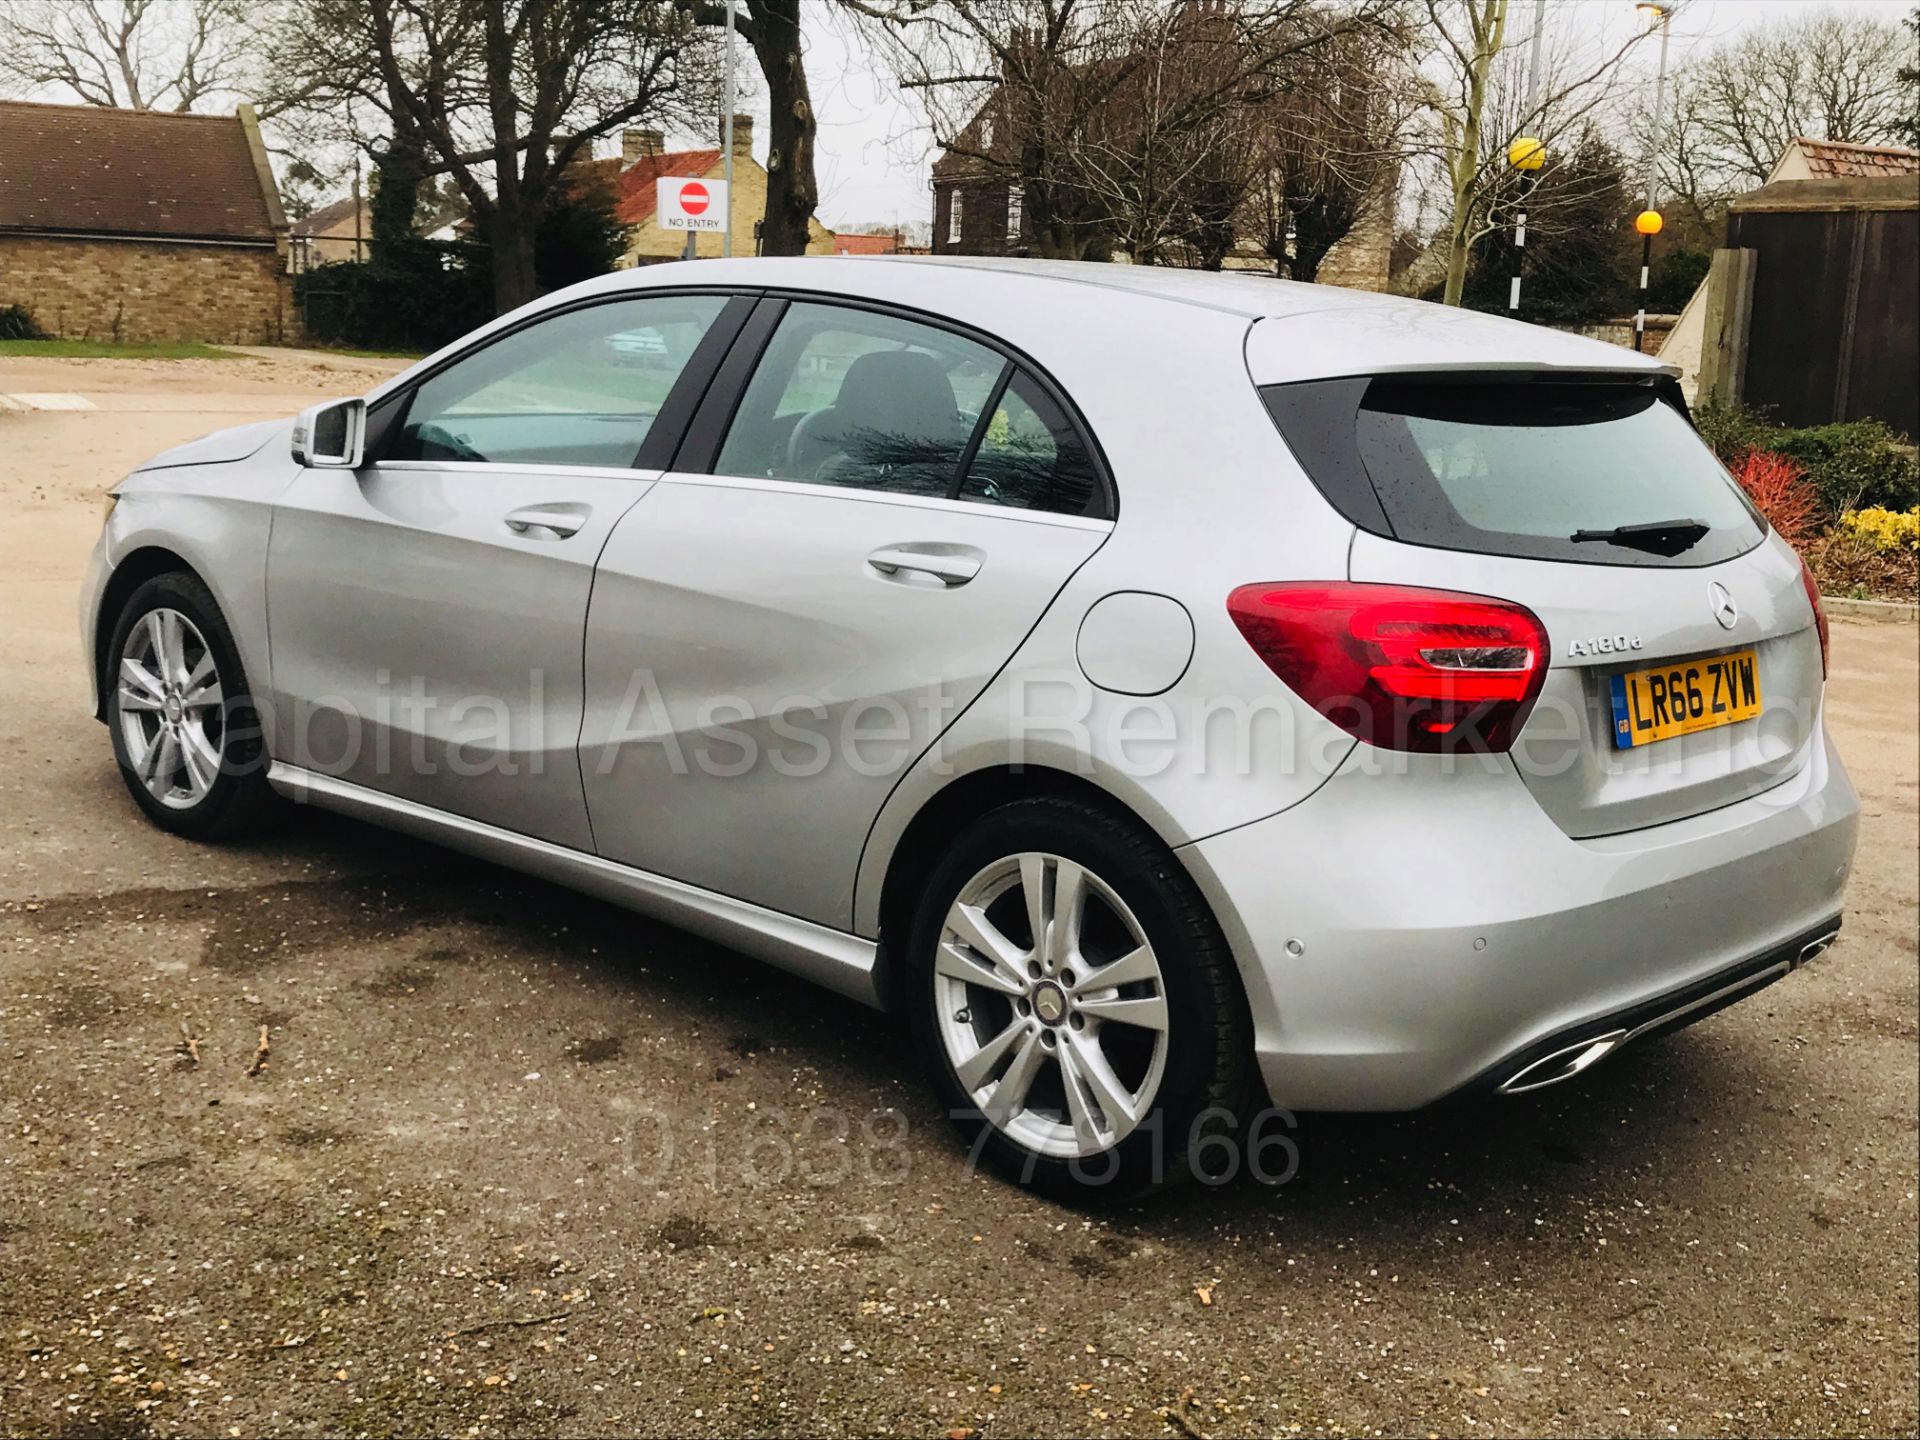 MERCEDES-BENZ A180D 'SPORT' (2017 MODEL) '7G TRONIC AUTO - LEATHER - SAT NAV' (1 OWNER FROM NEW) - Image 8 of 41